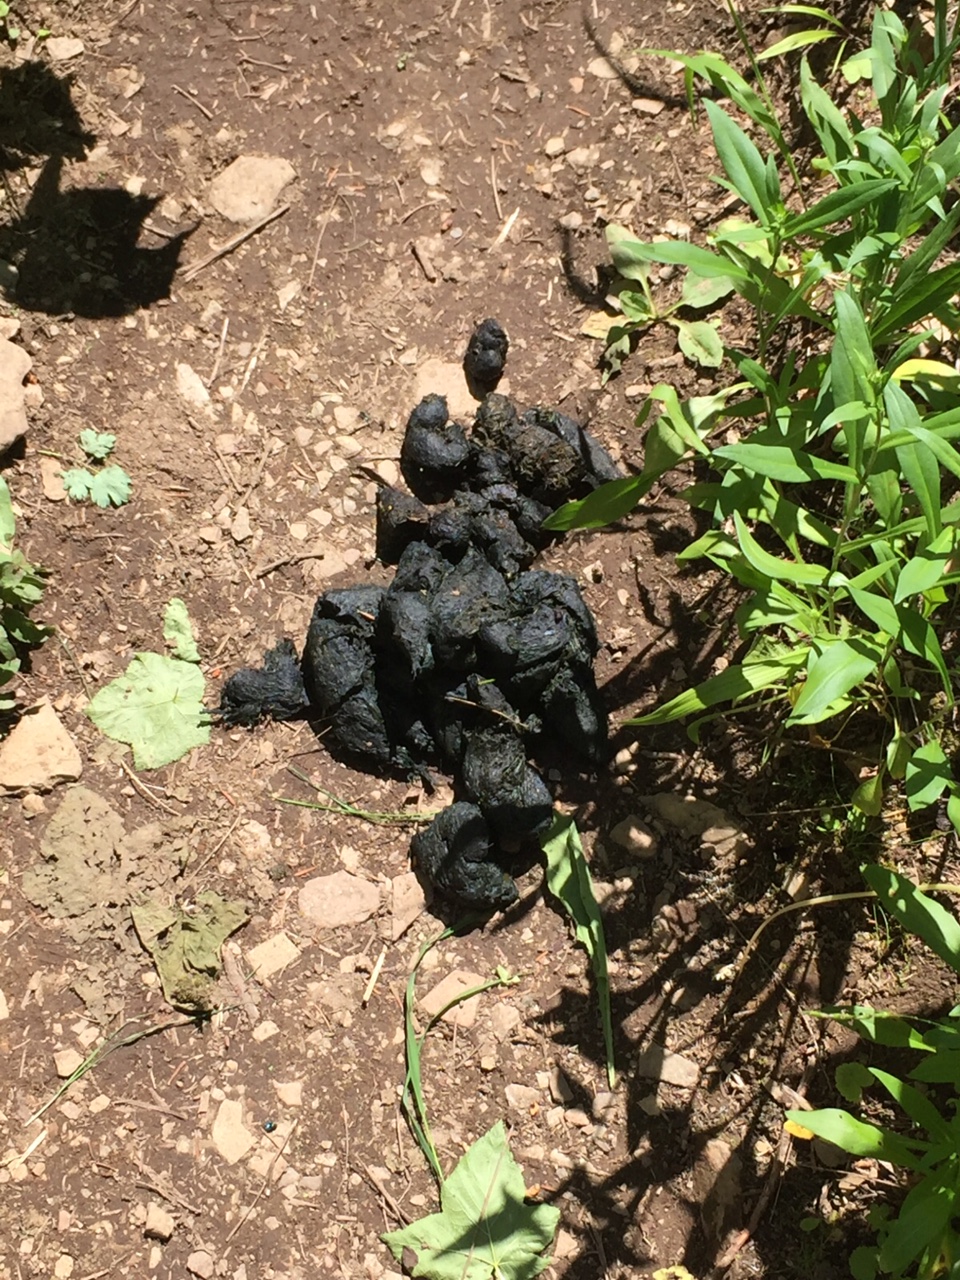 A large pile of animal poop on a dirt path